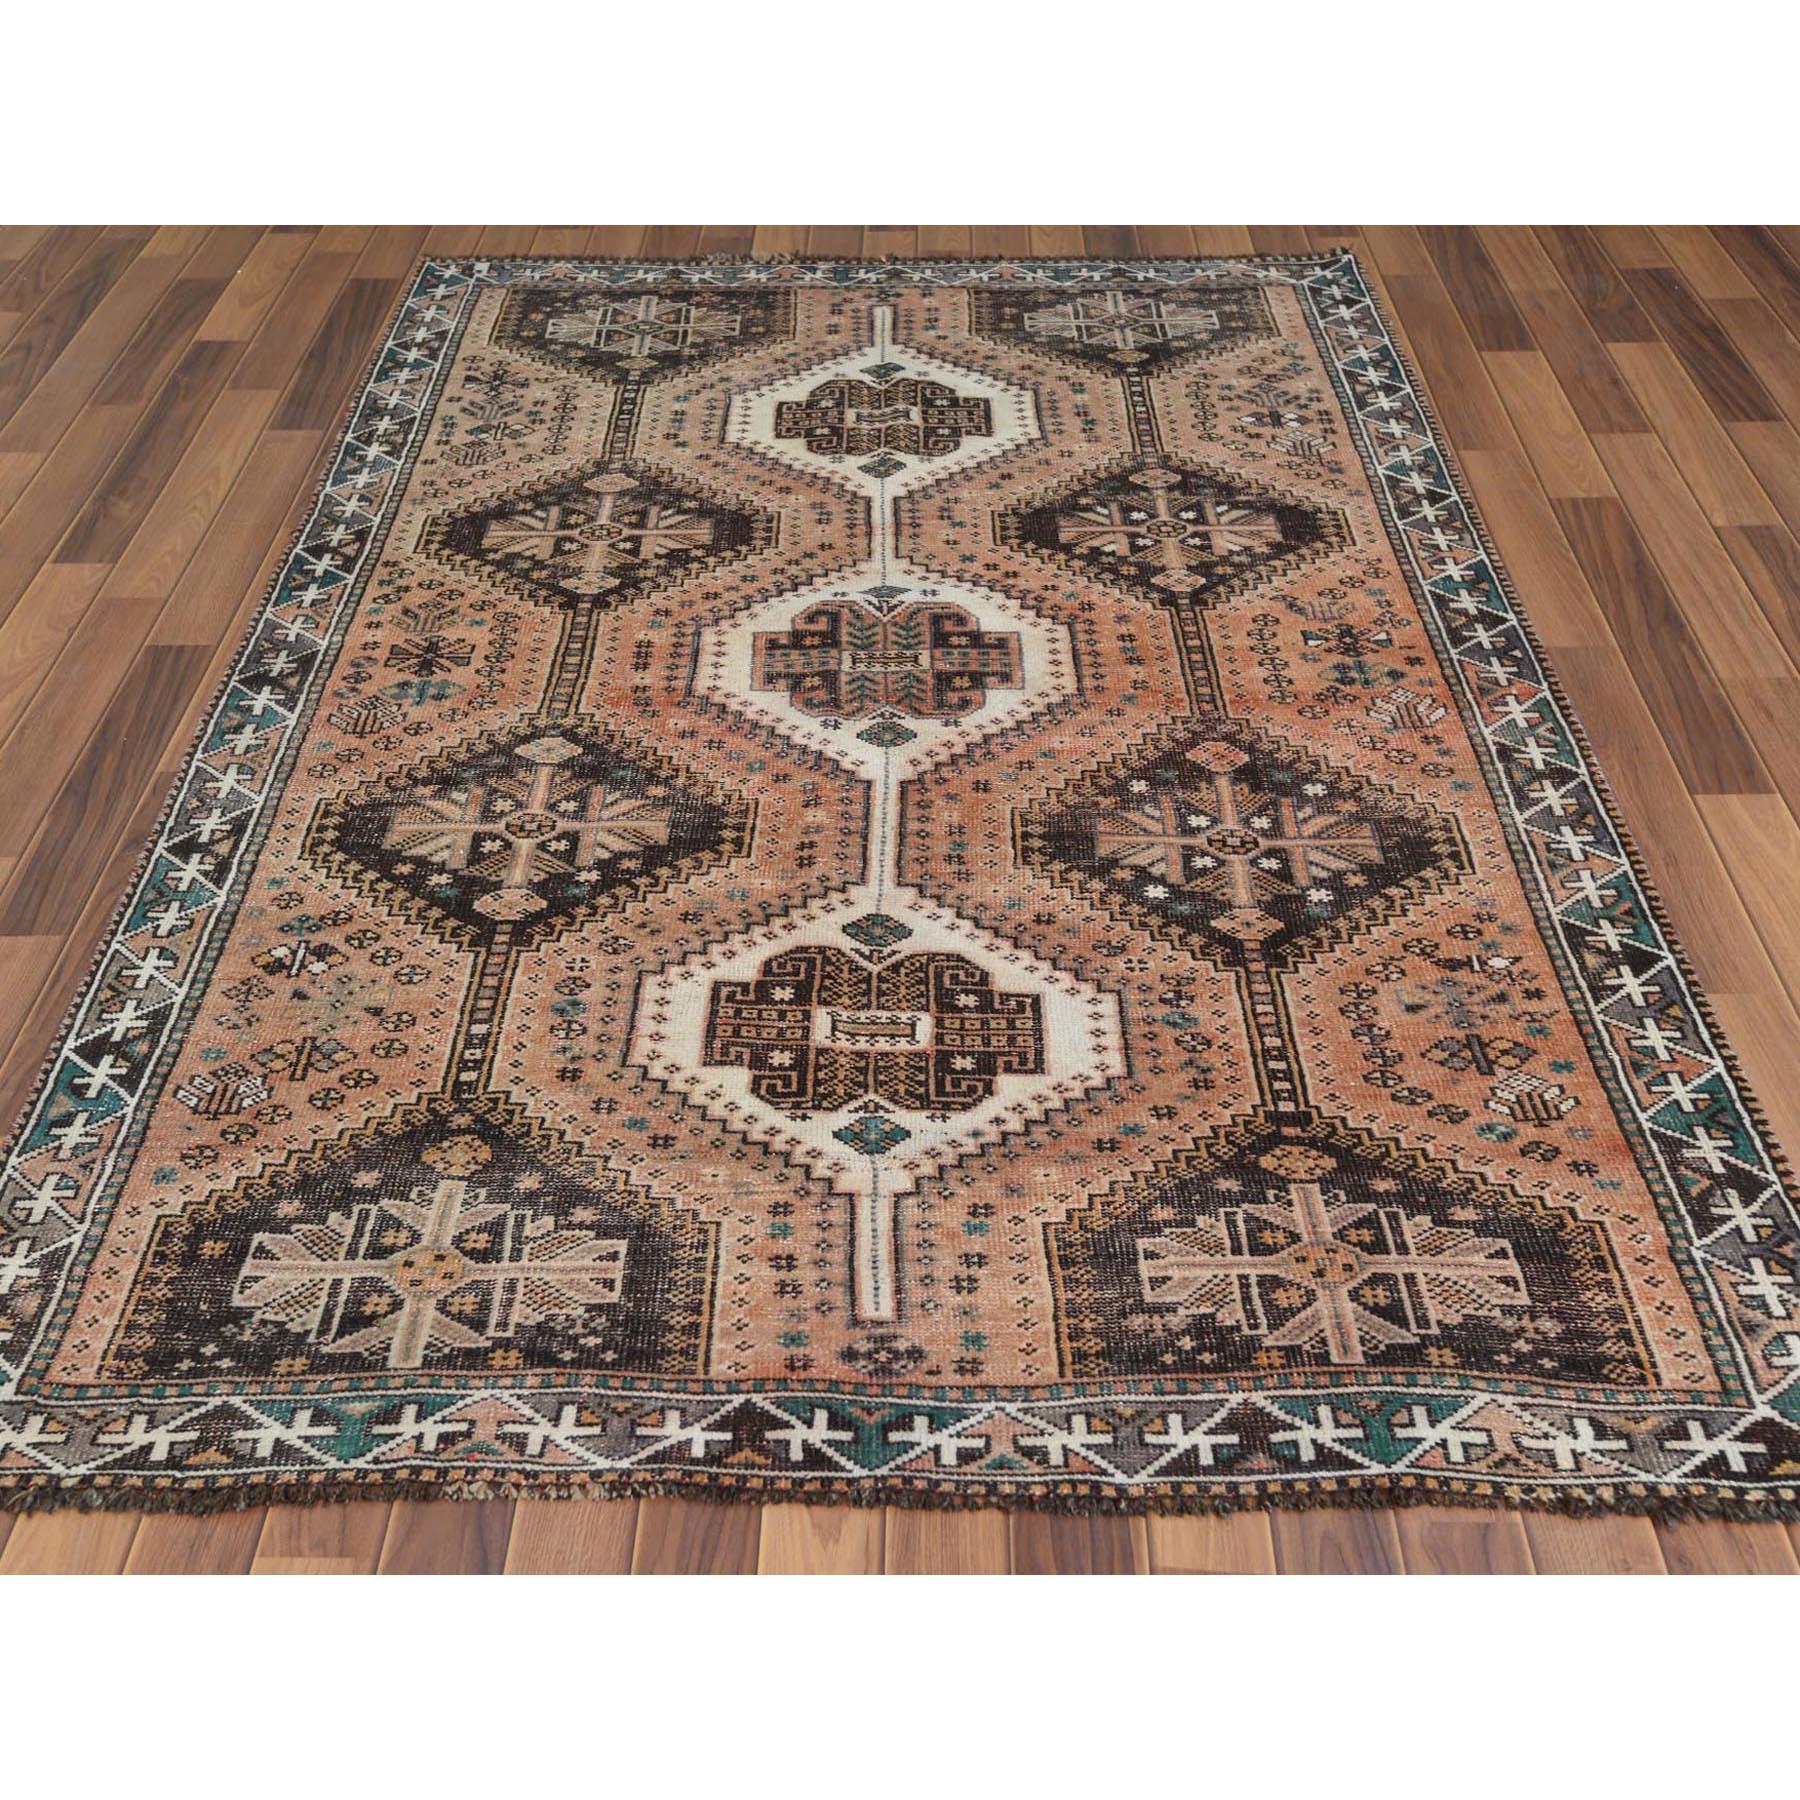 This fabulous hand knotted carpet has been created and designed for extra strength and durability. This rug has been handcrafted for weeks in the traditional method that is used to make rugs. This is truly a one of kind piece. 

Exact rug size in